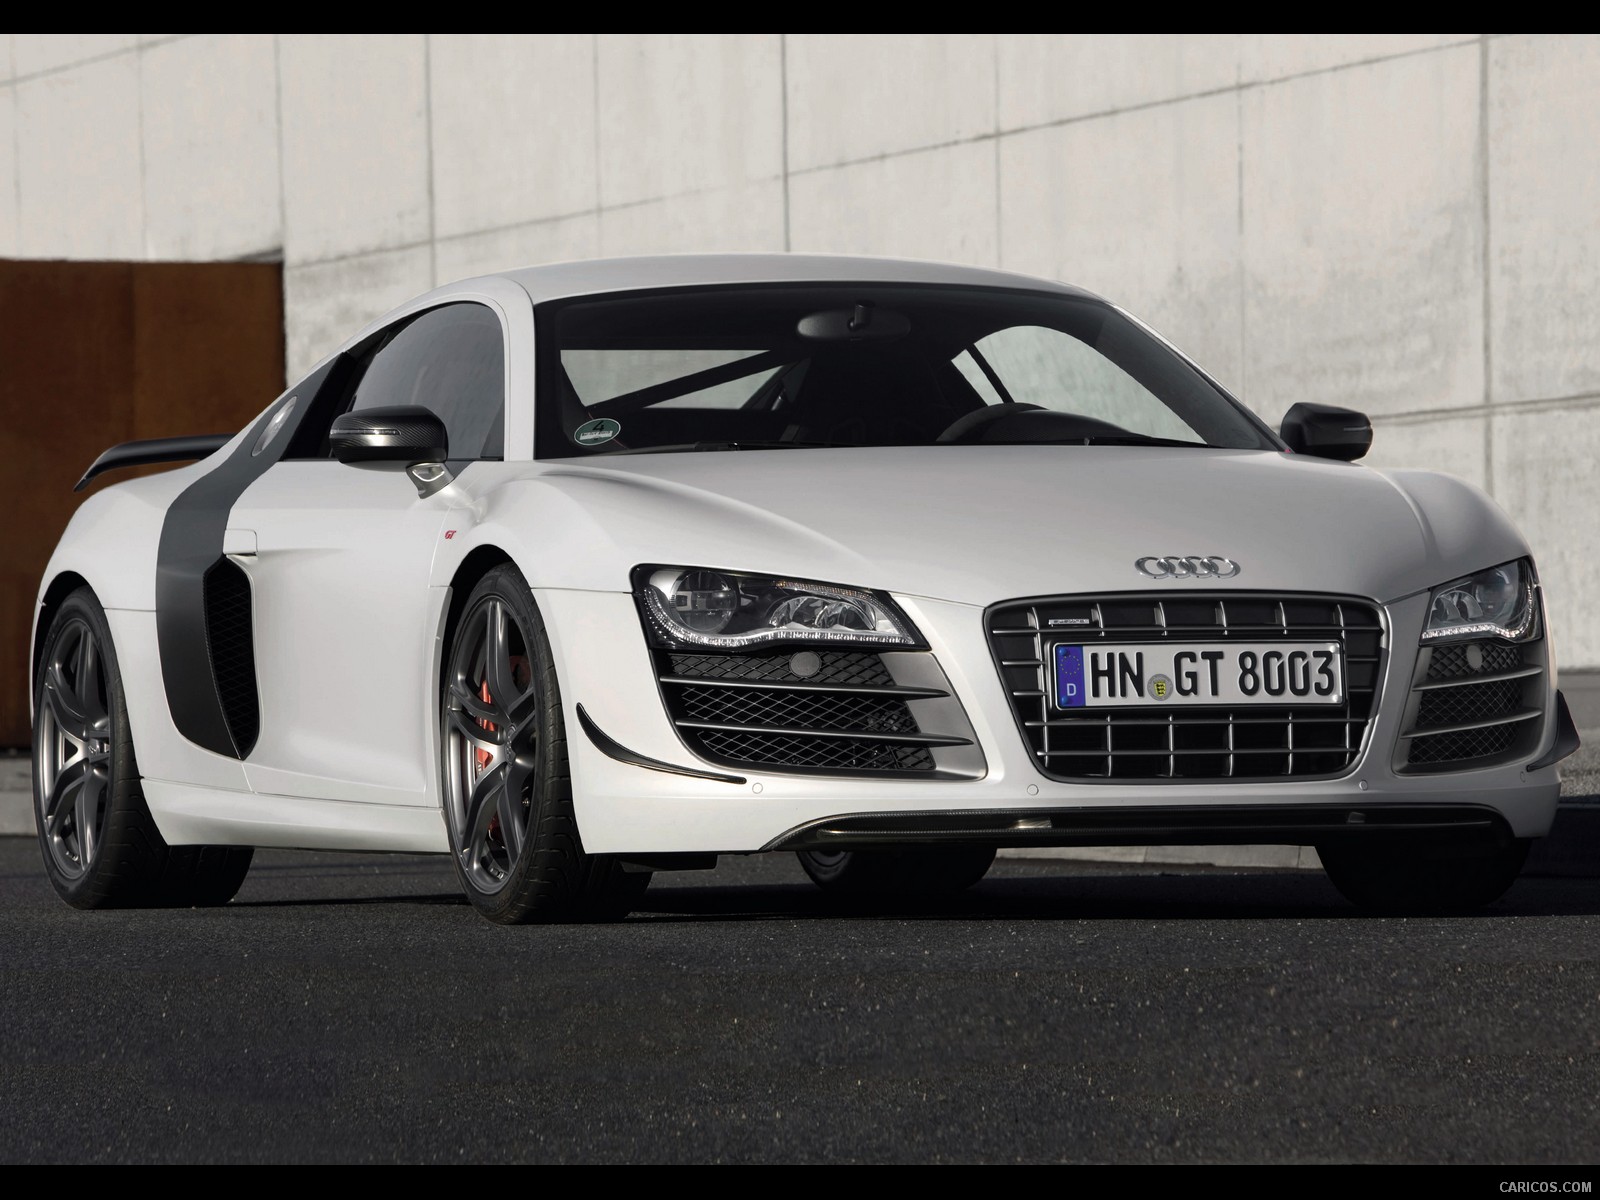  Audi R8 GT Front Angle Wallpaper 1600x1200